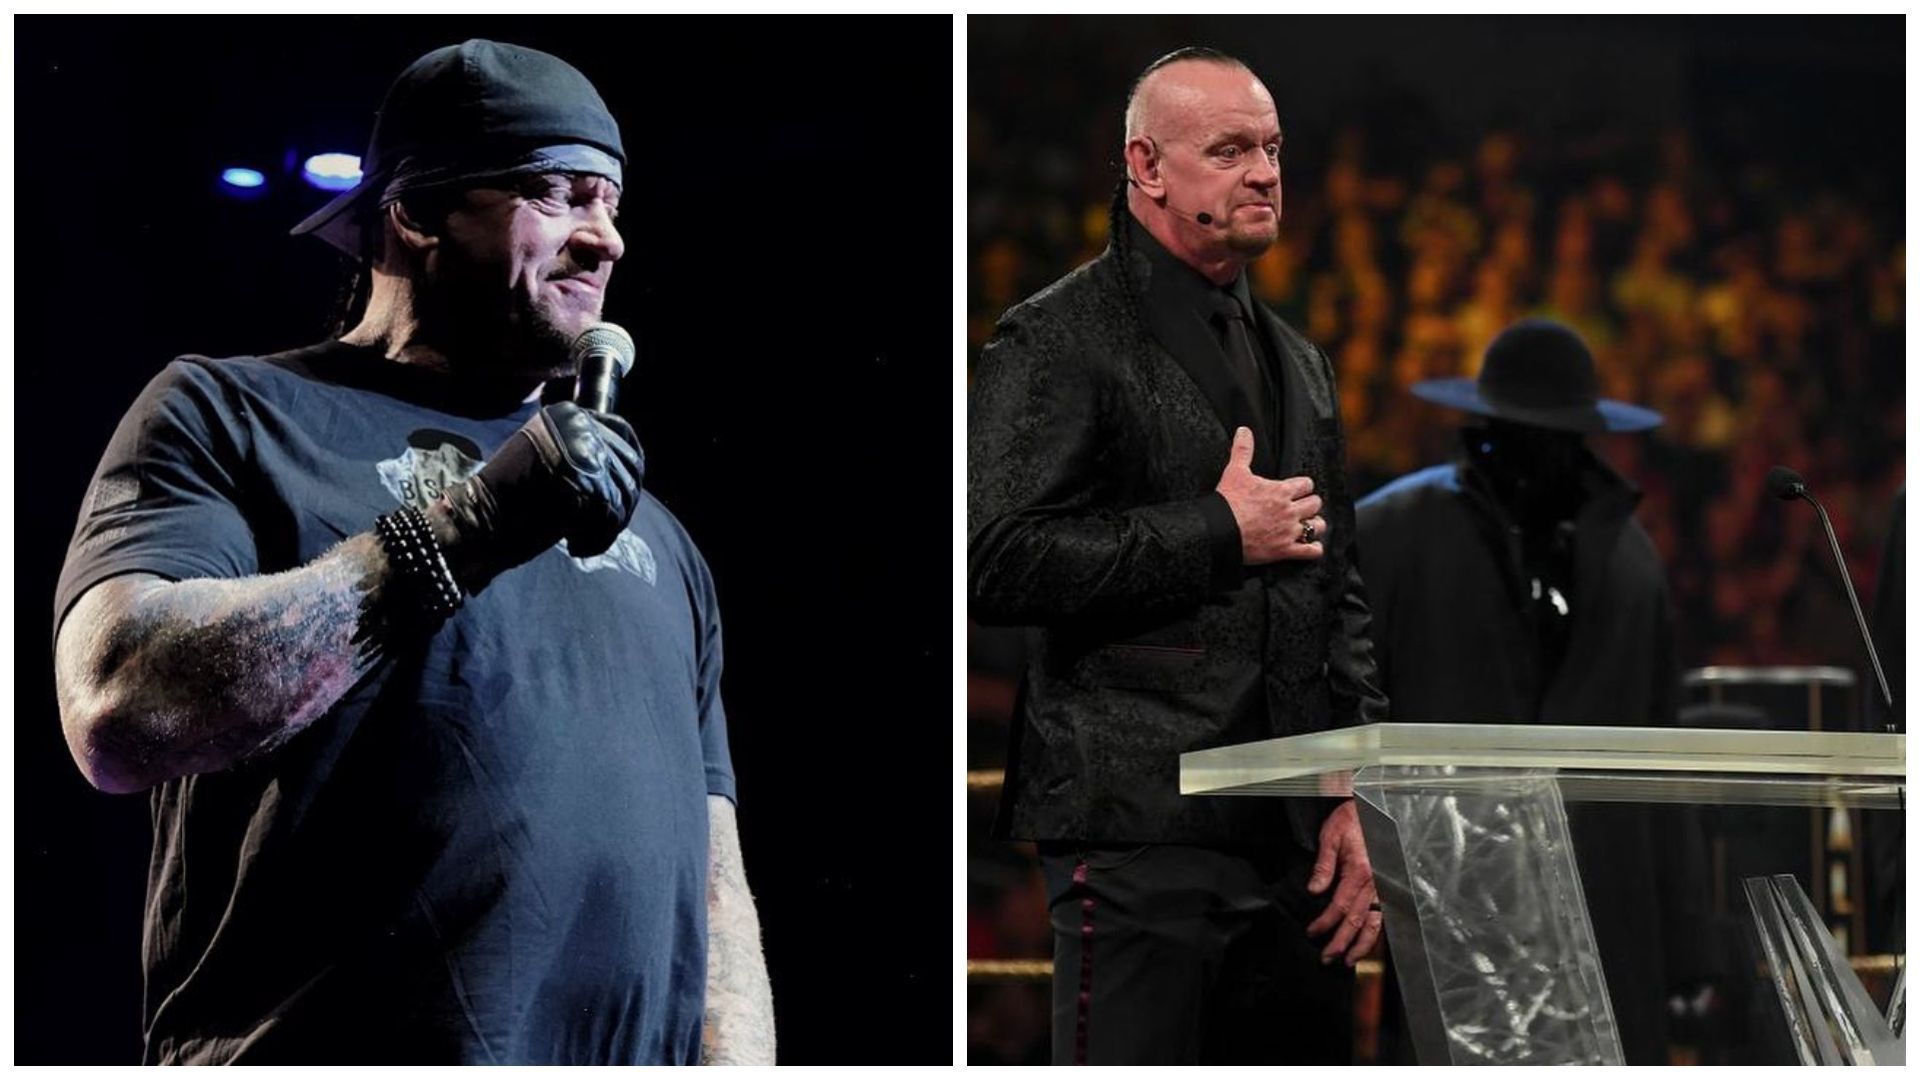 The Undertaker was inducted in WWE Hall of Famer in 2022.